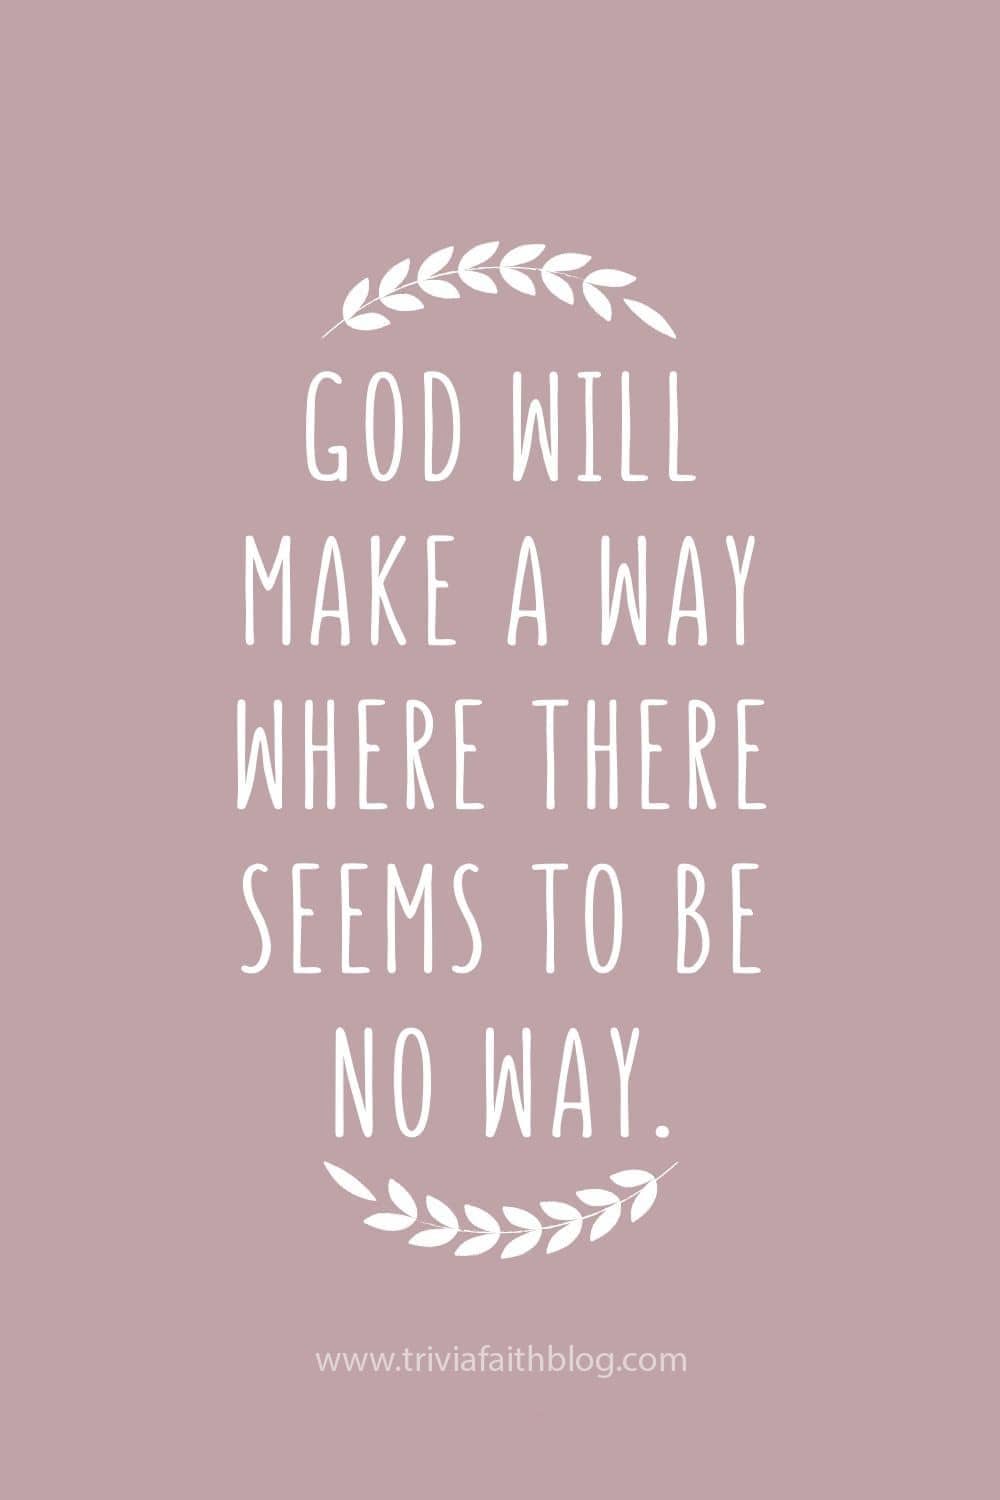 God will make a way where there seems to be no way